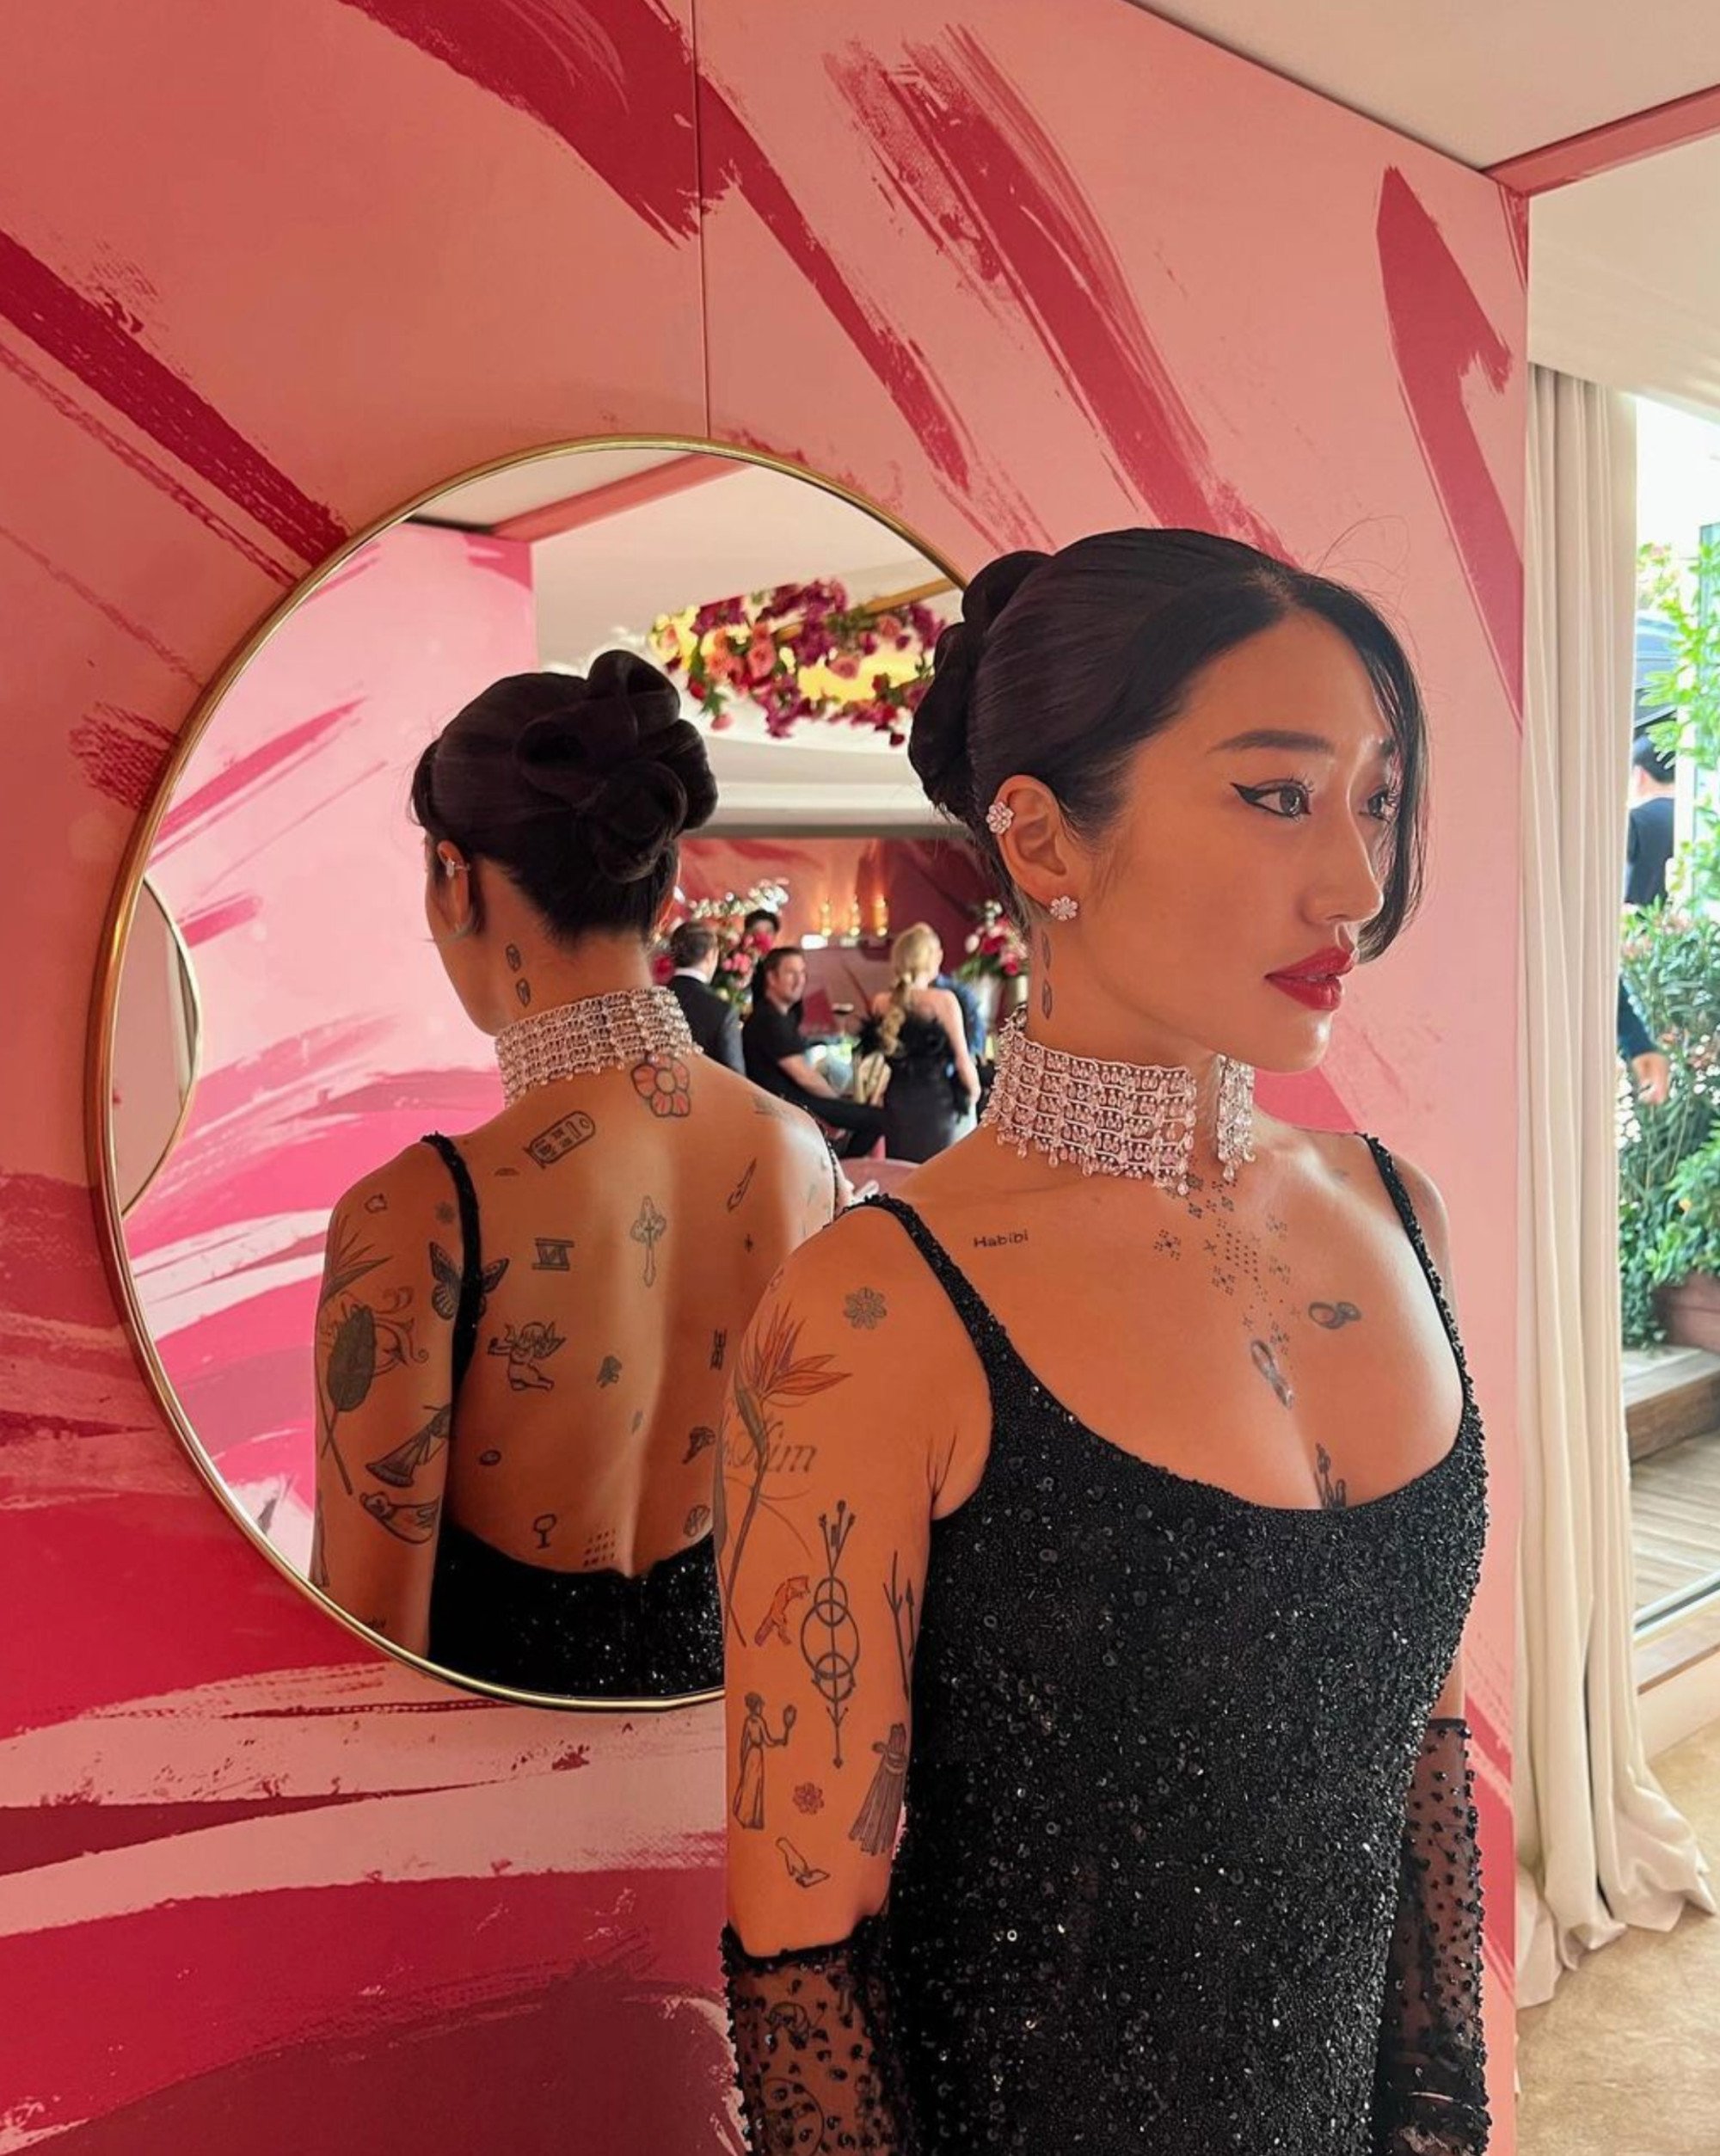 South Korean DJ Peggy Gou collects plastic waste on Bali beach, scolds  people who litter on Instagram